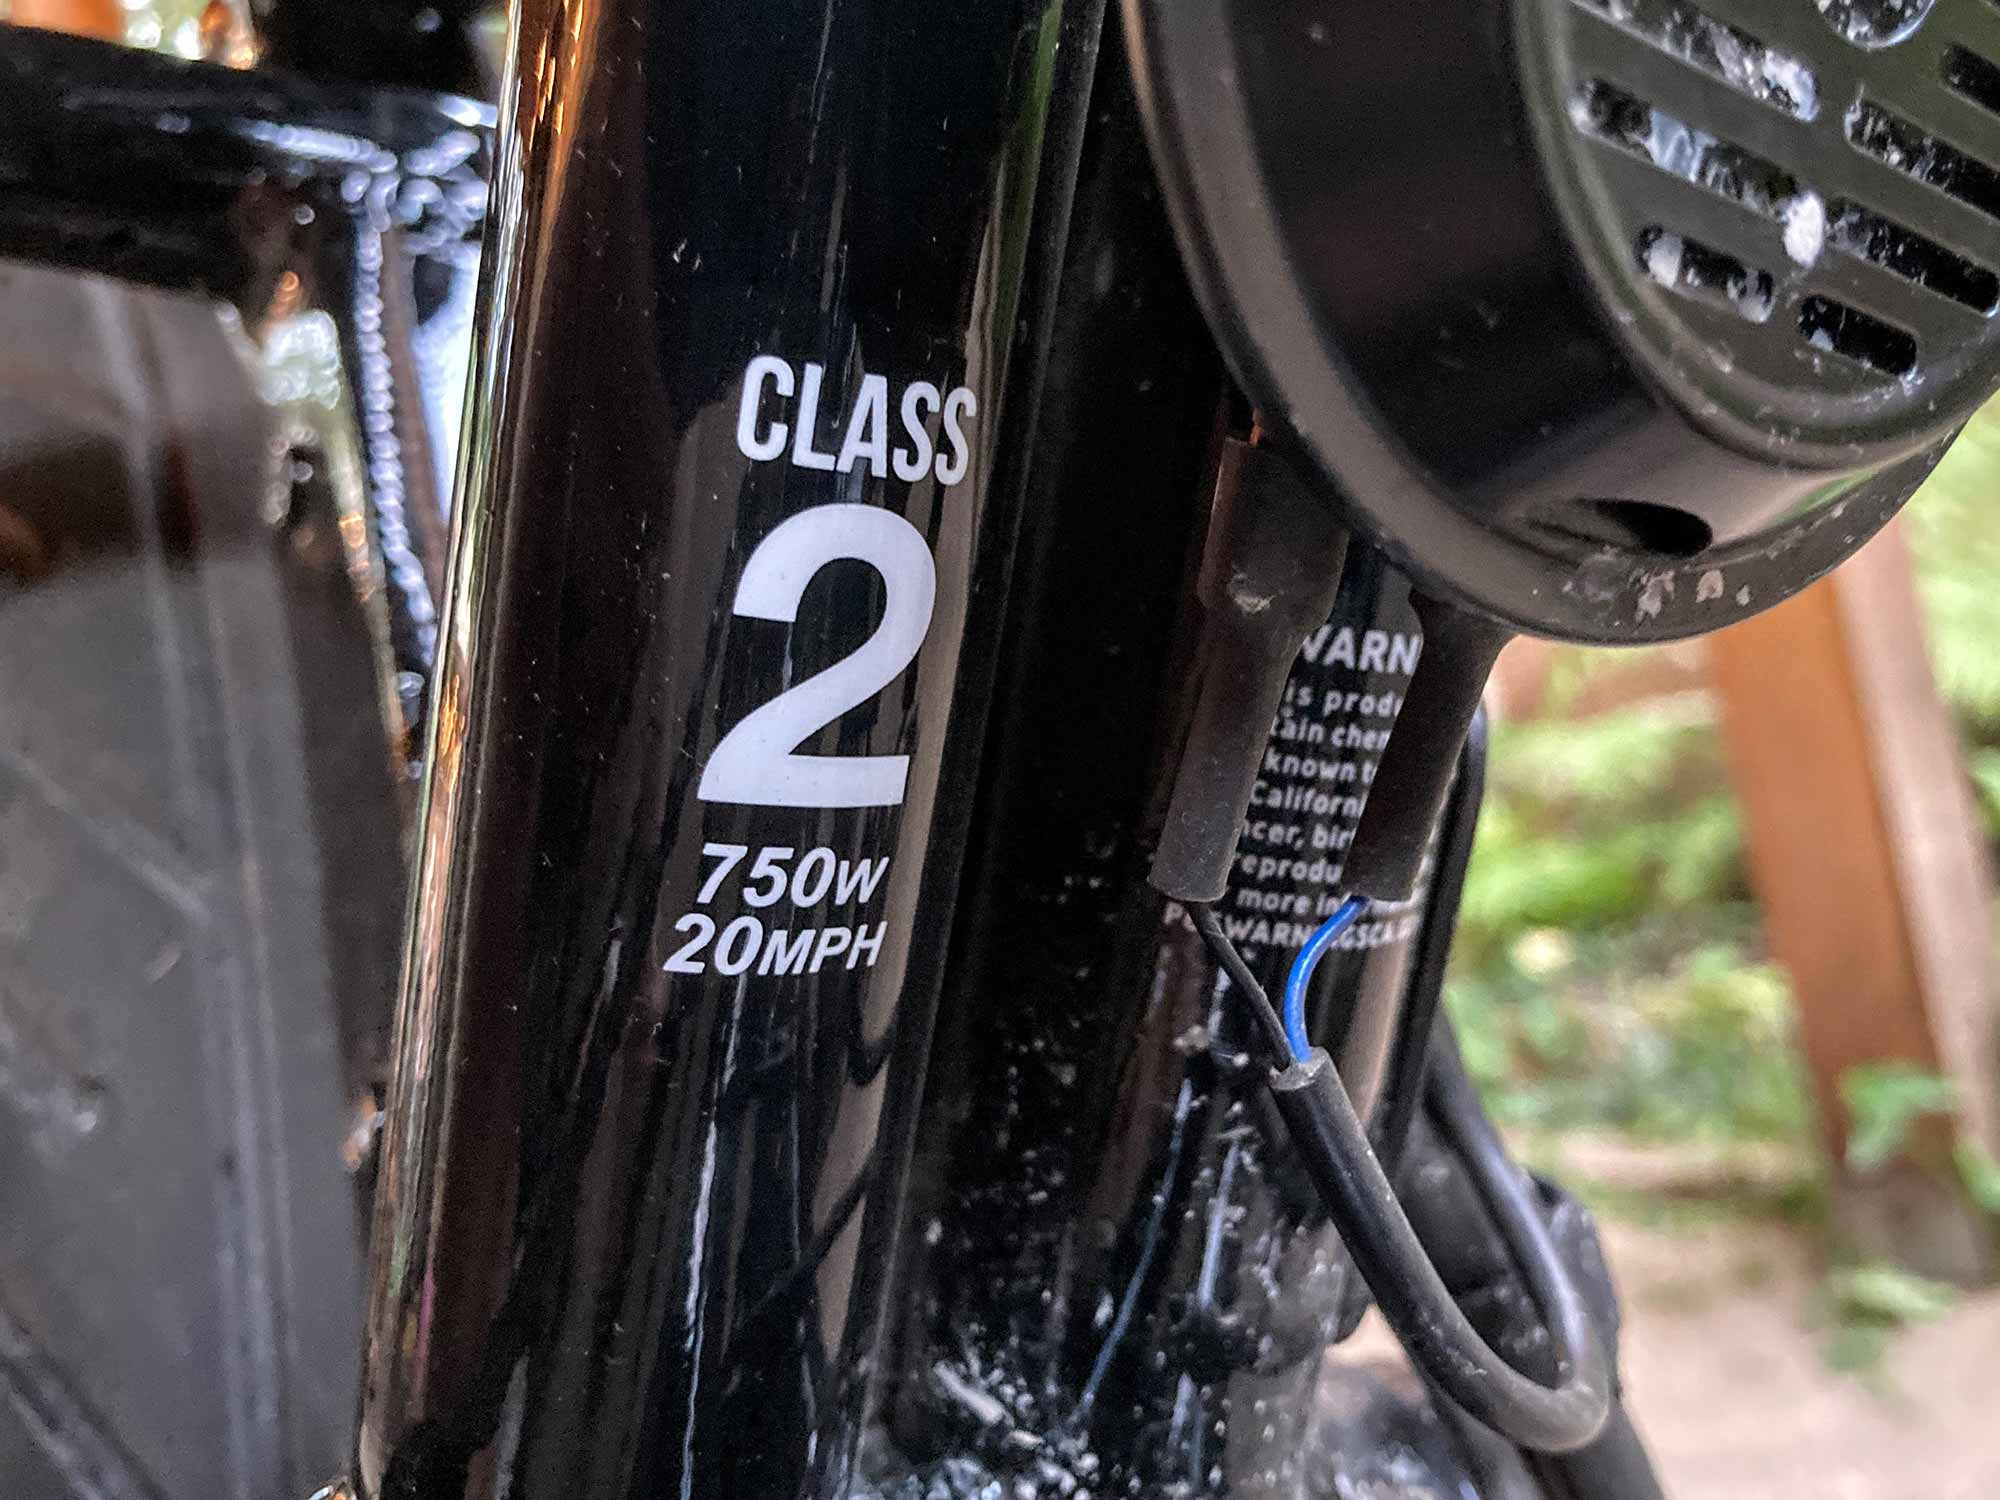 The Brooklyn comes preprogrammed as Class 2 ebike, but skip a class to graduate to Class 3.